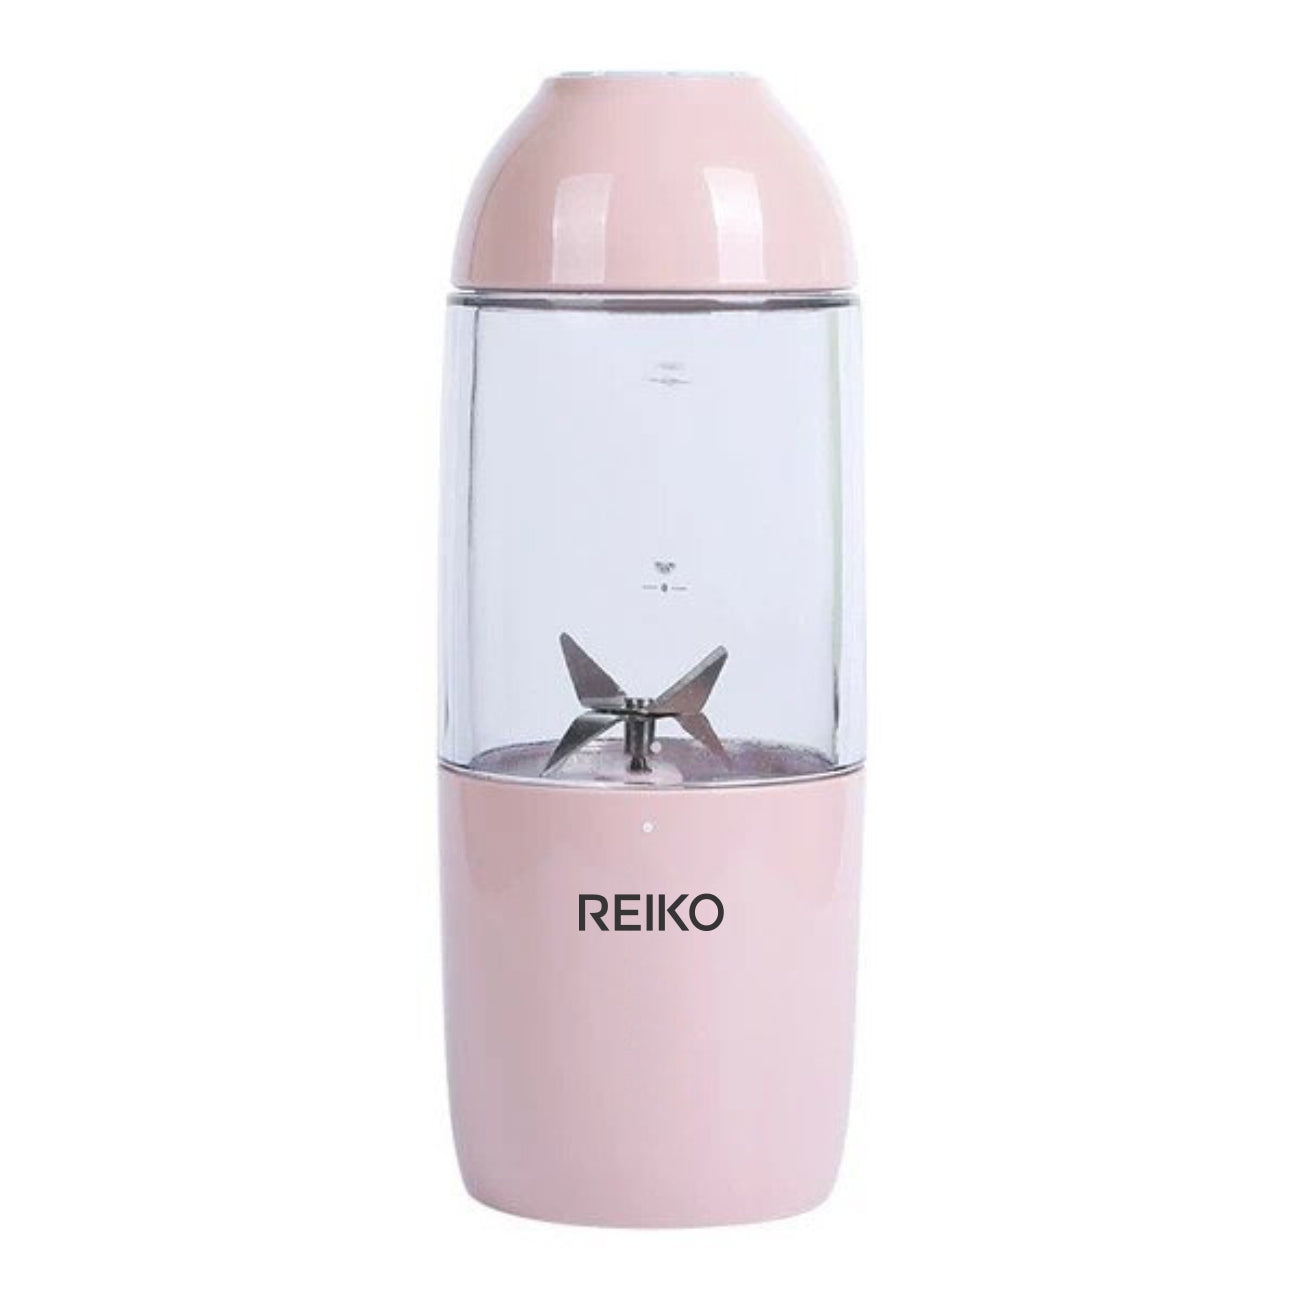 Blender With USB Rechargeable Batteries Portable 380mL Pink Color